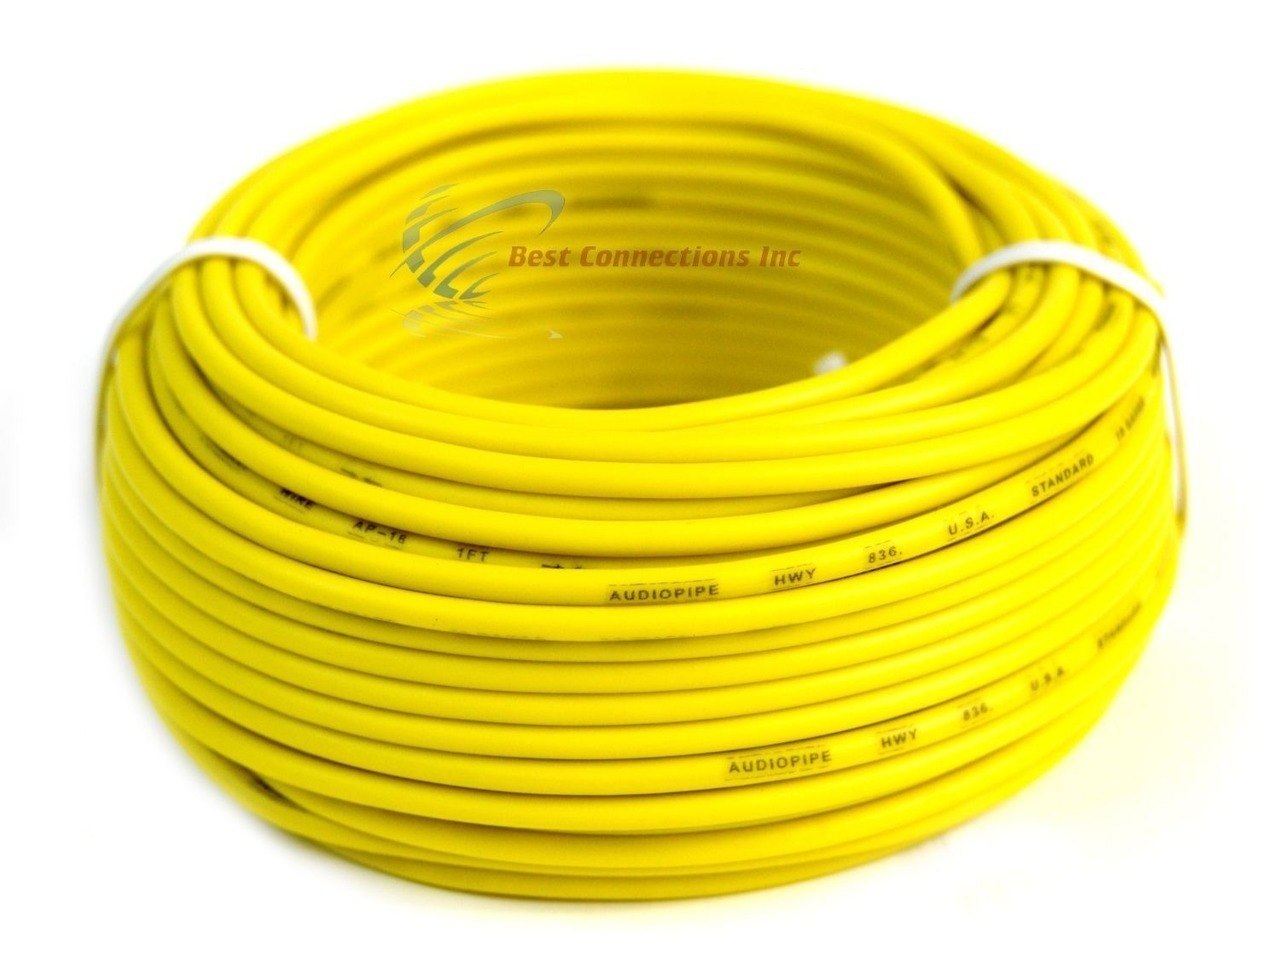 18 GA Gauge 50' Feet Yellow Audiopipe Car Audio Home Remote Primary Cable Wire - image 3 of 4